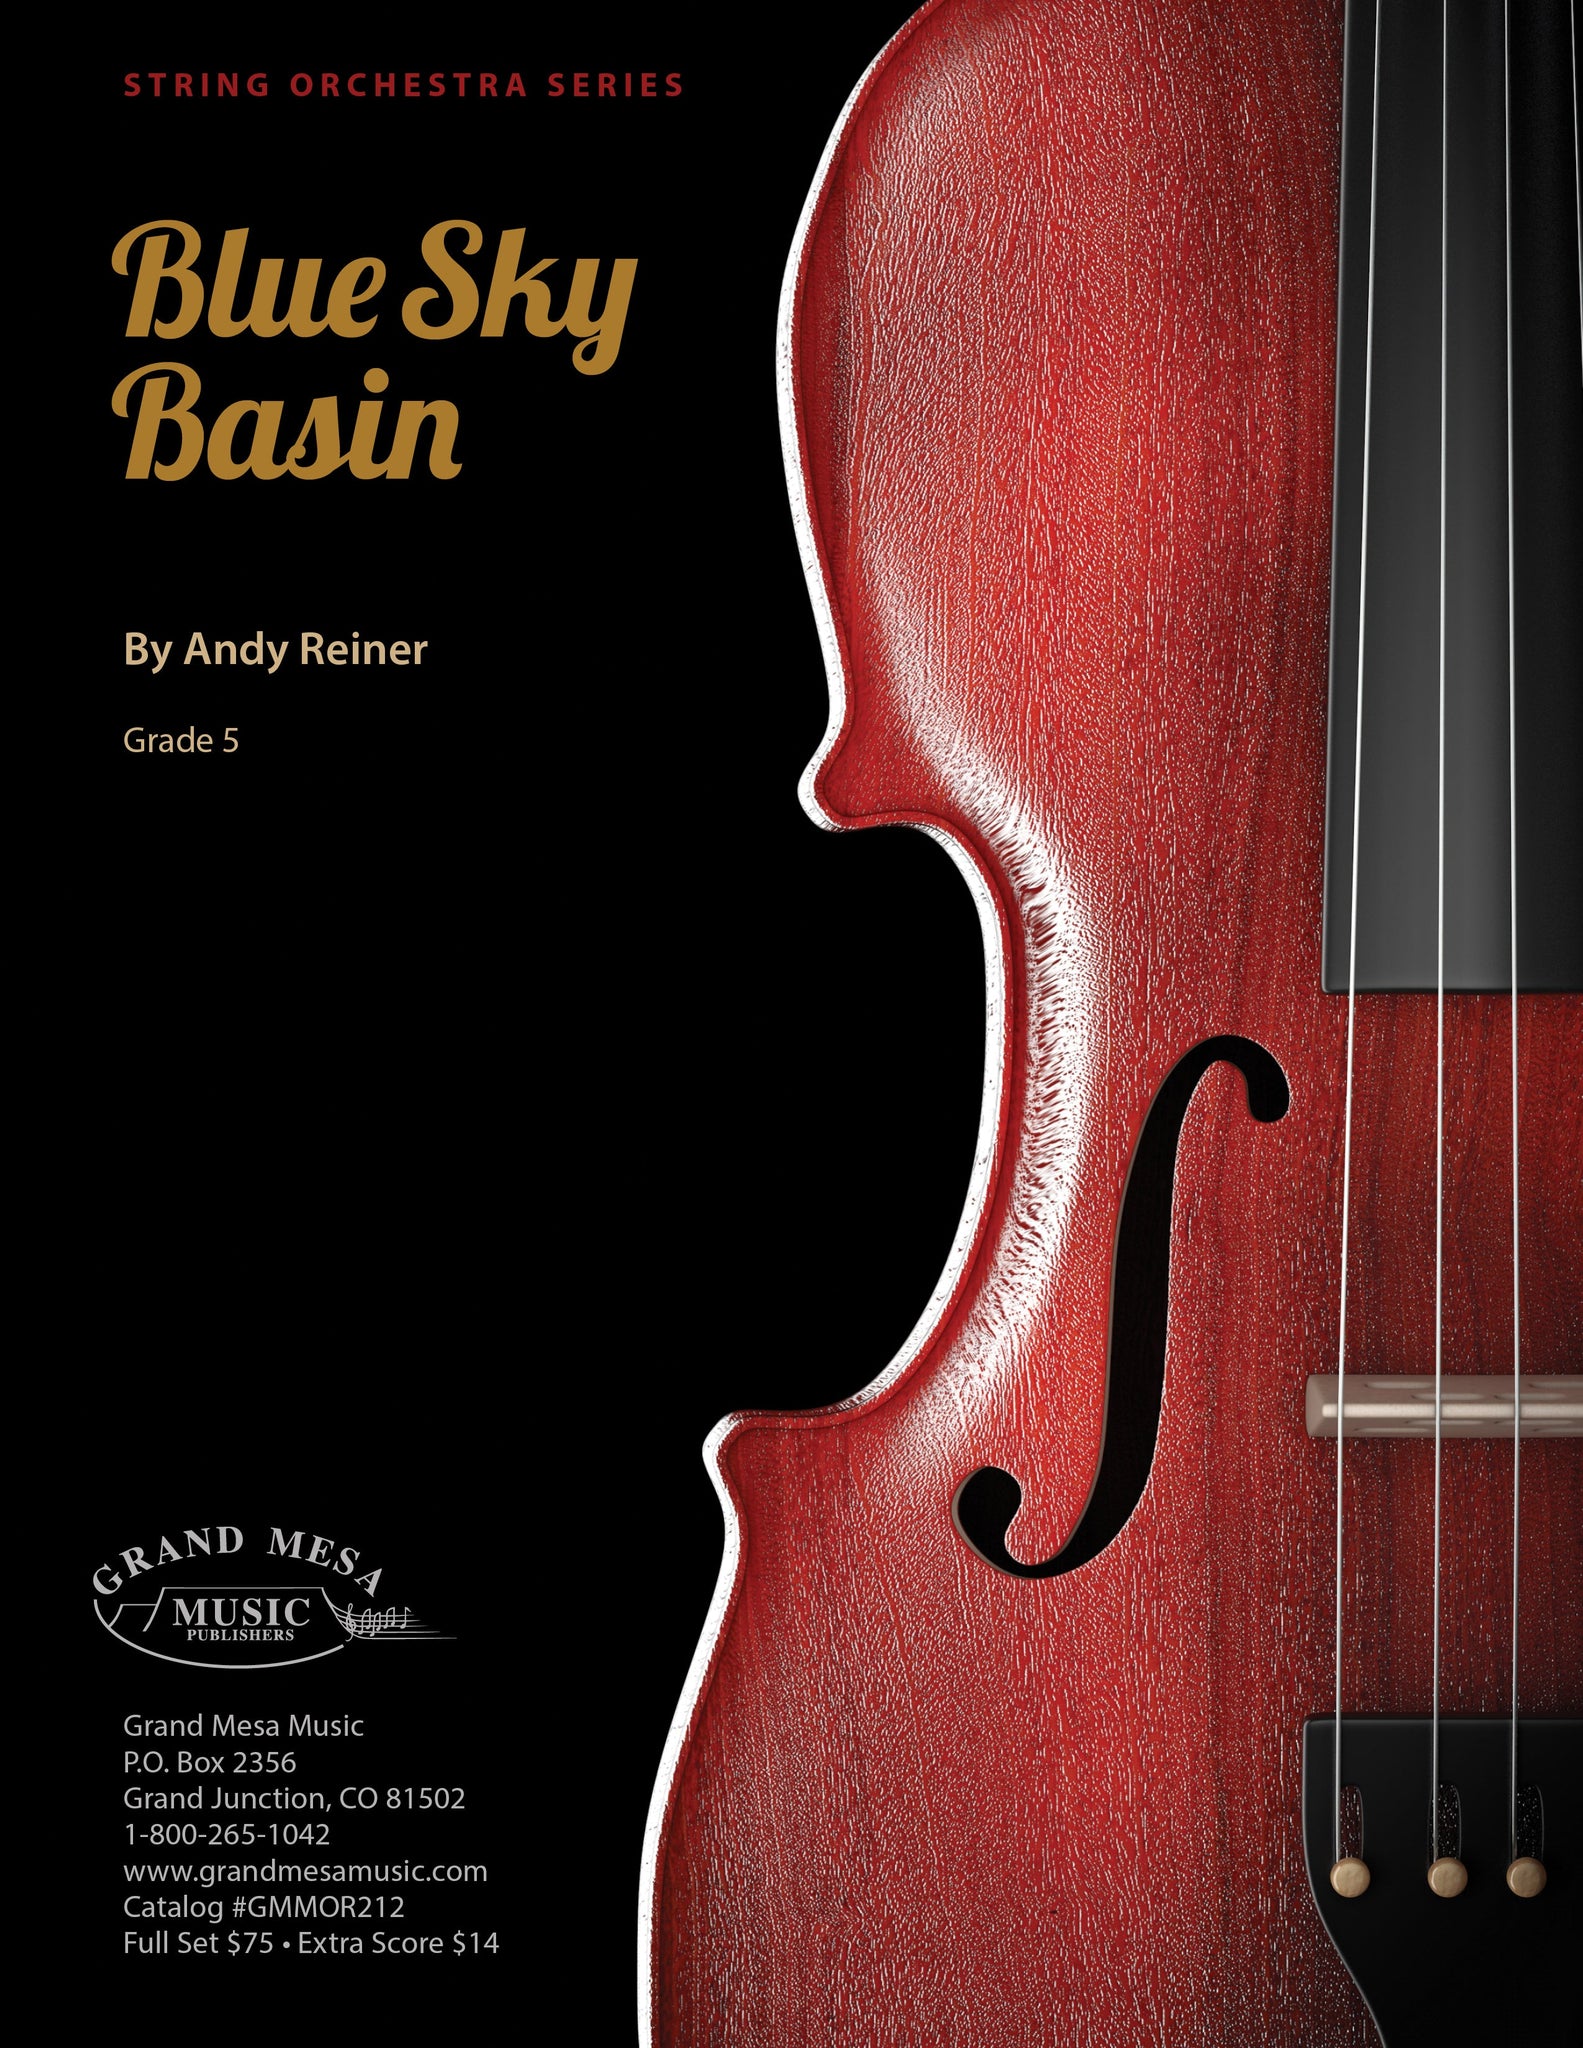 Strings sheet music cover of Blue Sky Basin, composed by Andy Reiner.